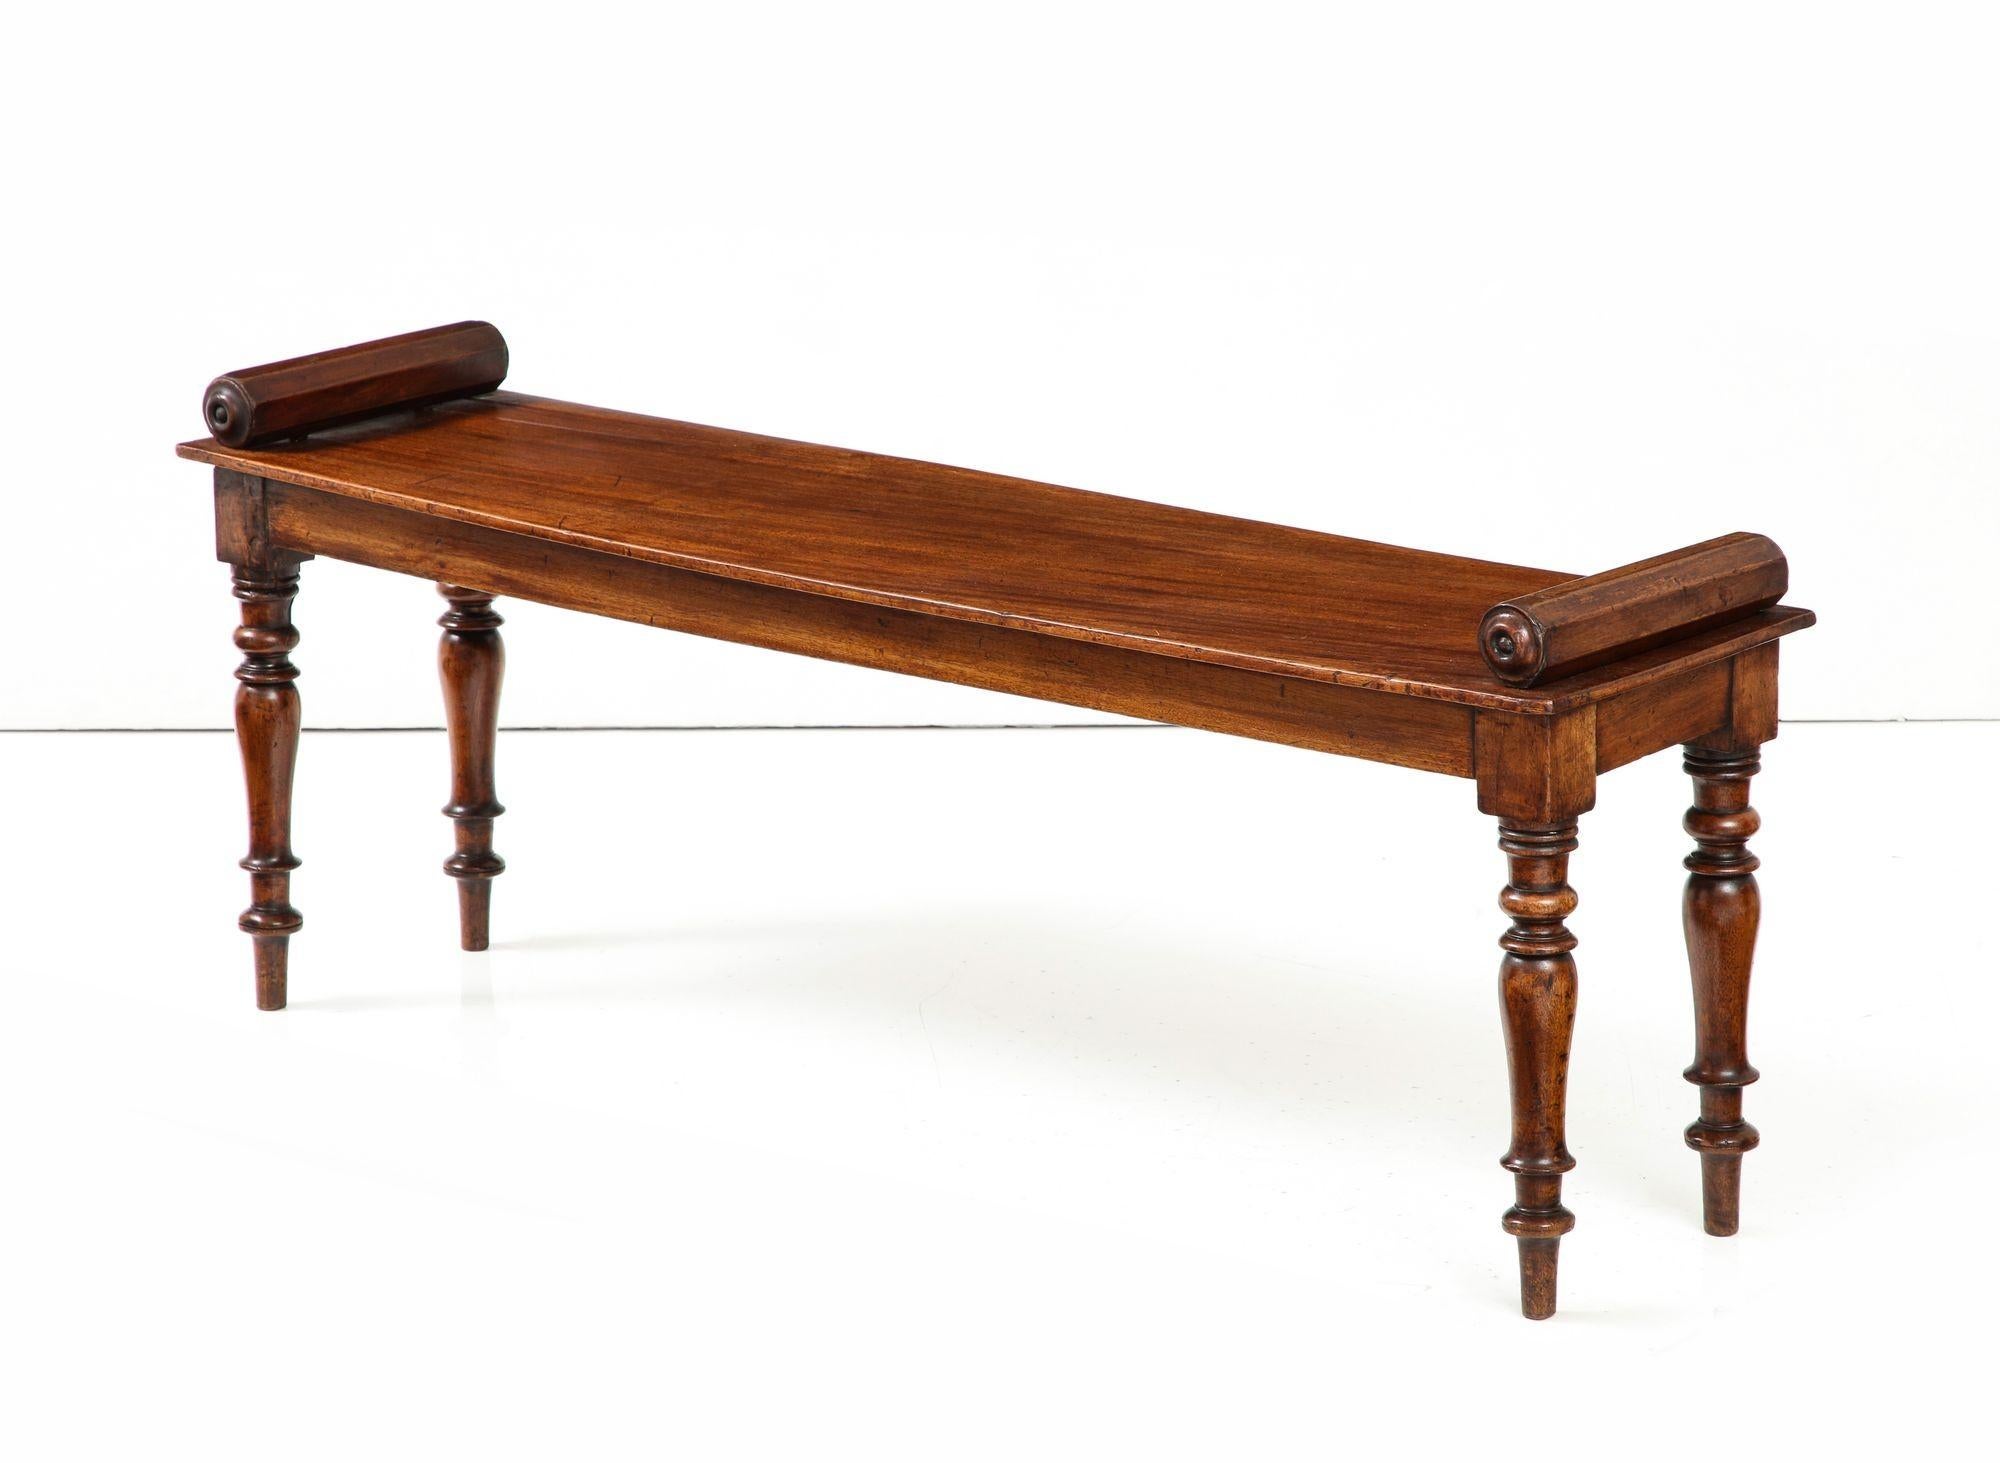 An early 19th century English mahogany hall bench having molded edge top with octagonal bolster ends on shallow apron with baluster turned legs. Can be used with or without loose custom-made Fortuny cushion seen in photos.